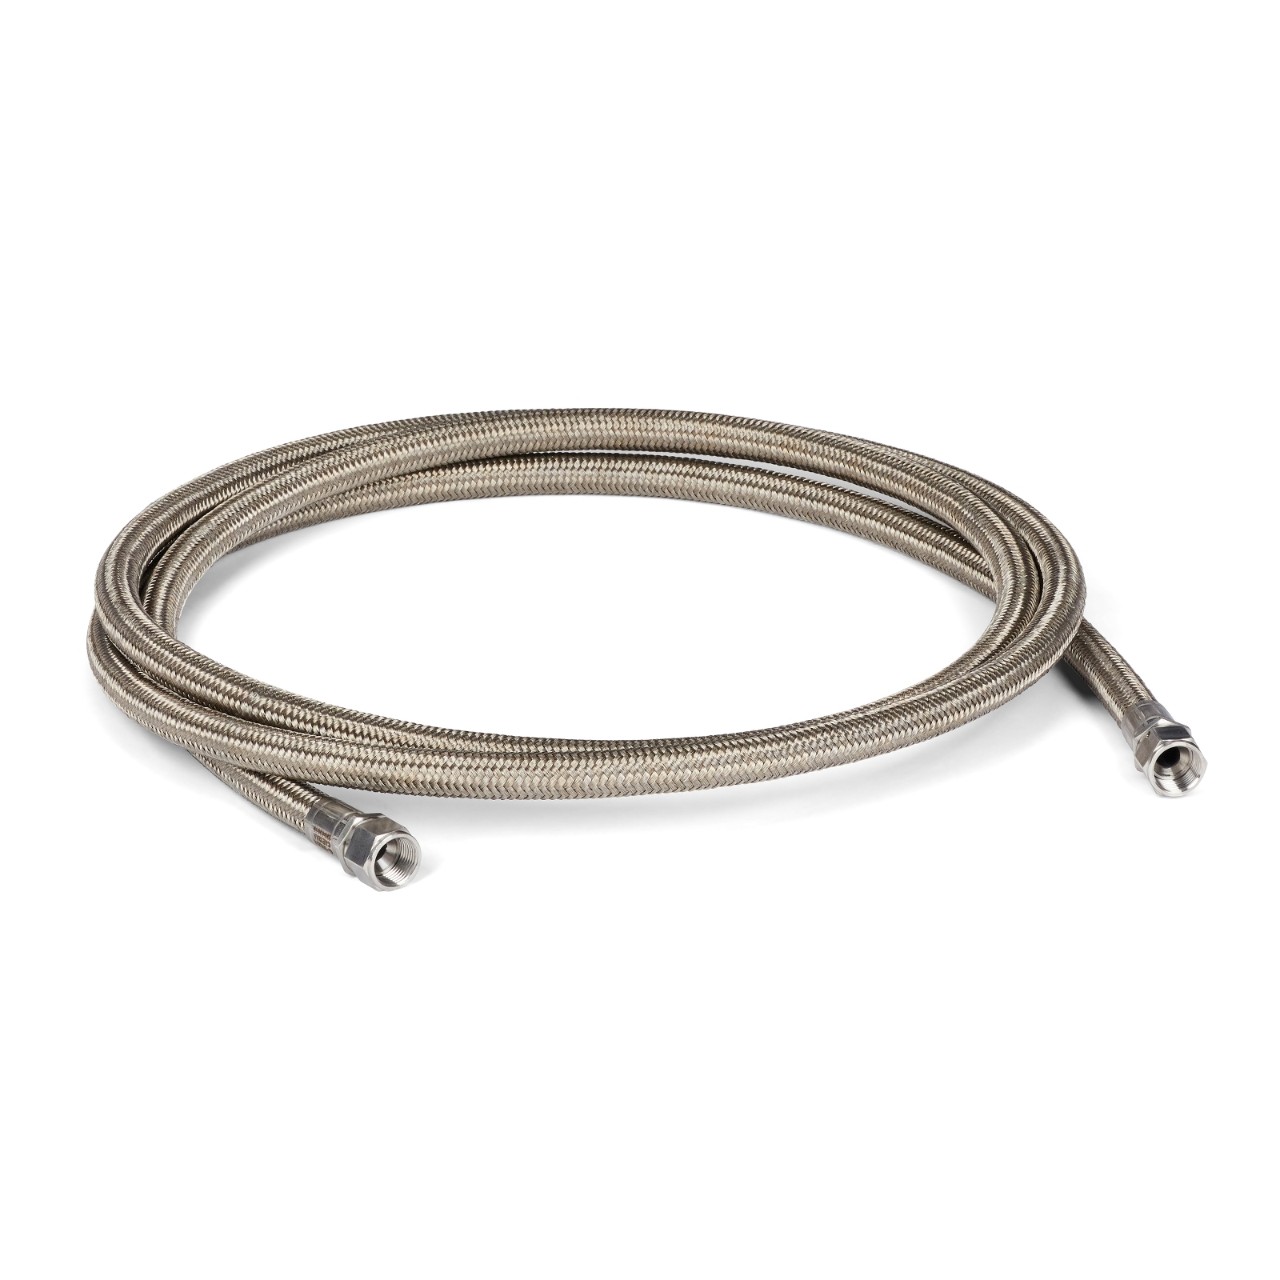 10 ft. (3.0 M) Stainless Steel Braided PTFE Ambient Hose, No. 10